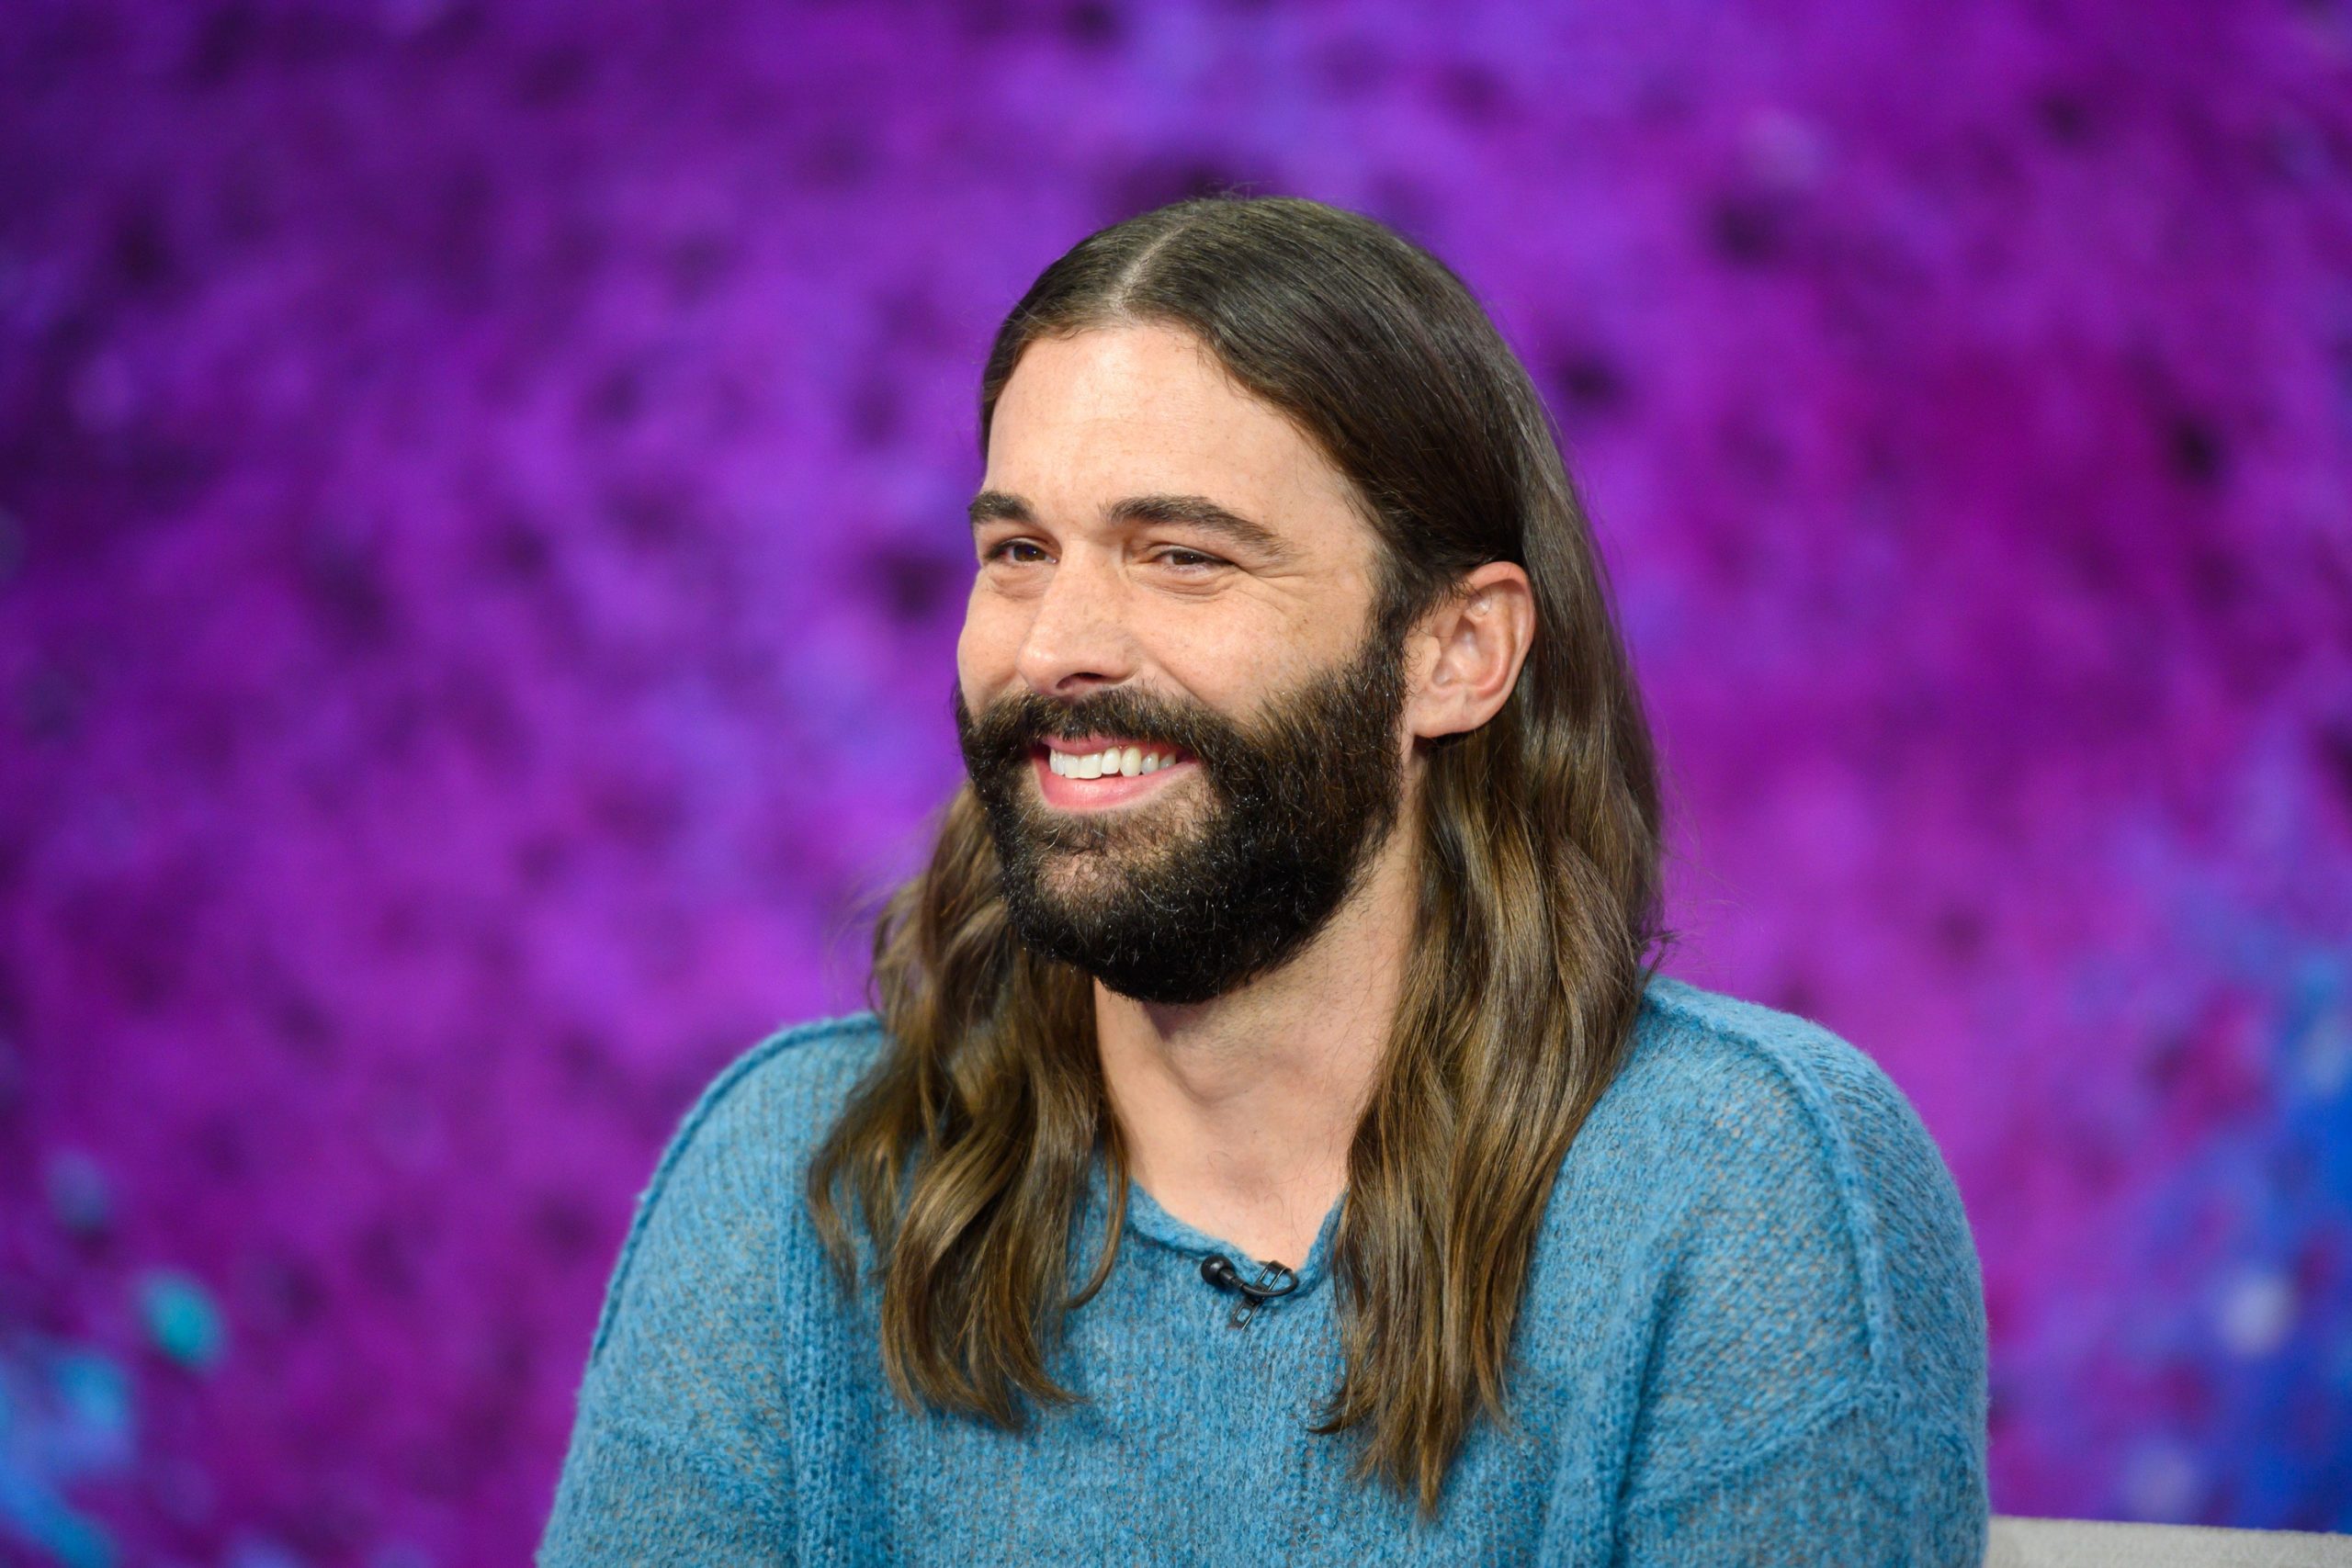 Why Jonathan Van Ness Wears a Fishnet Cap While Blow-Drying His Curly Hair